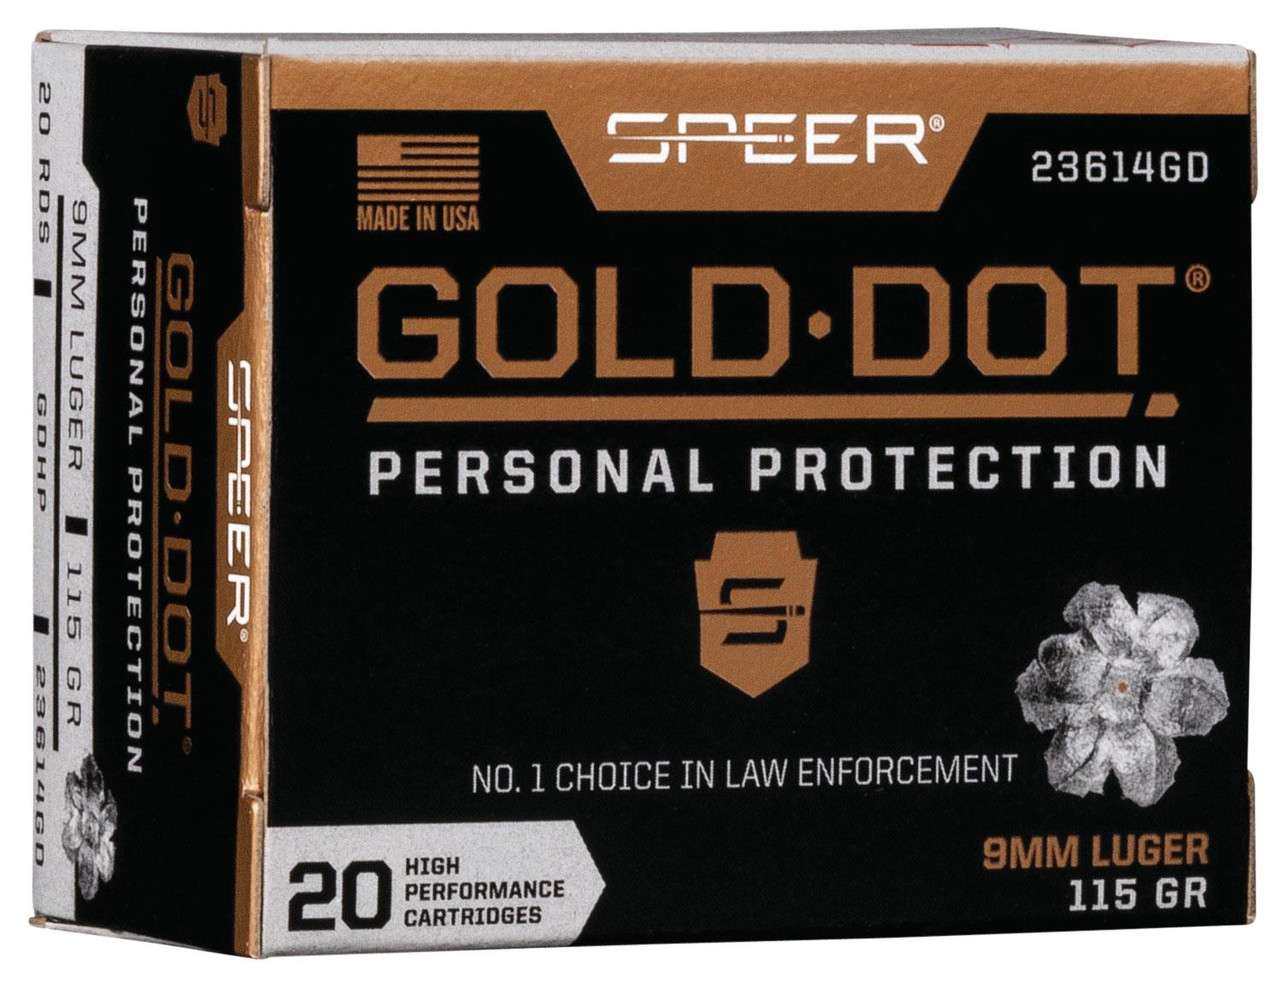 Speer Gold Dot Personal Protection 9mm Luger 23614GD